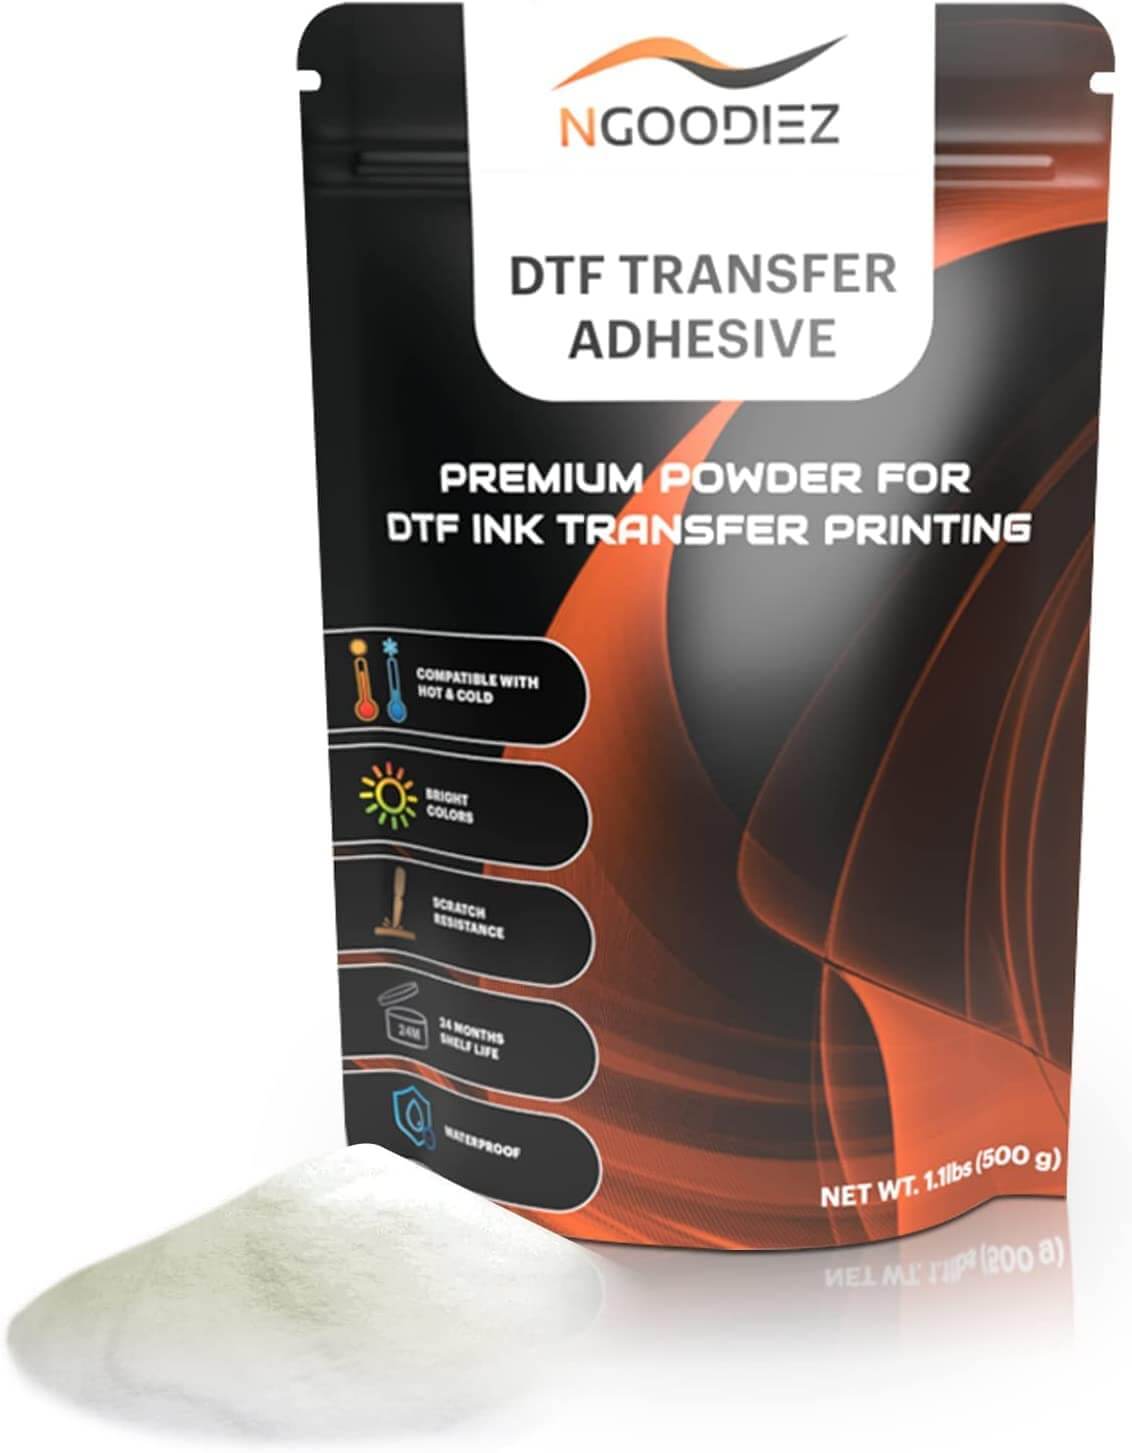 Wholesale DTF Powder Digital Transfer Hot Melt Adhesive DTG PreTreat Powder  for Direct Print on T-Shirts Manufacturer and Supplier